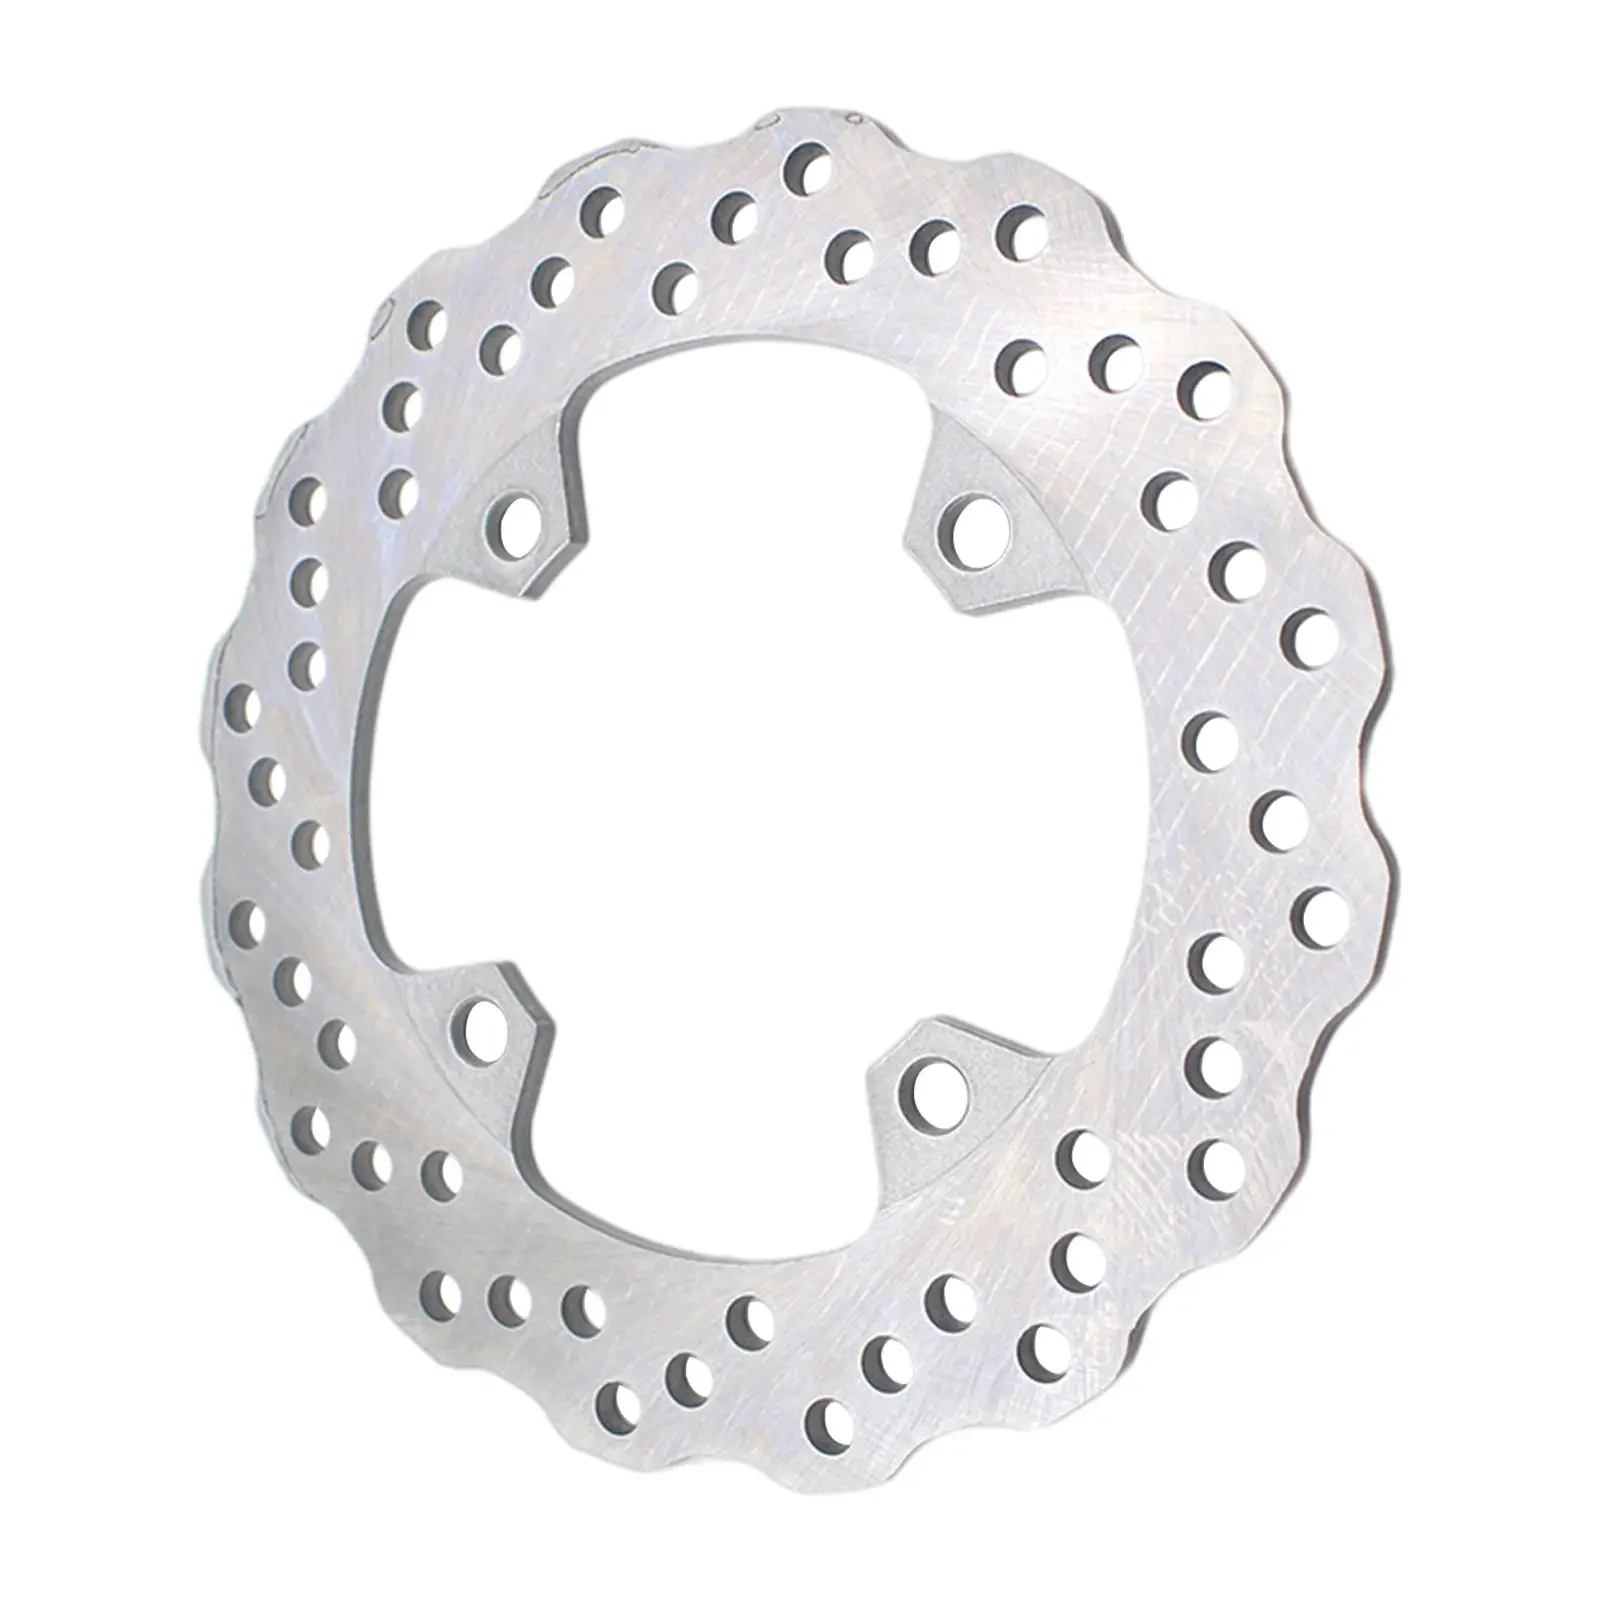 Rear Brake Disc Rotor Silver Motorcycle Replacement 220mm Accessories Steel for Kawasaki ER6F Z750 ZX6R ZX636 ER-6F ER-6N ER6N